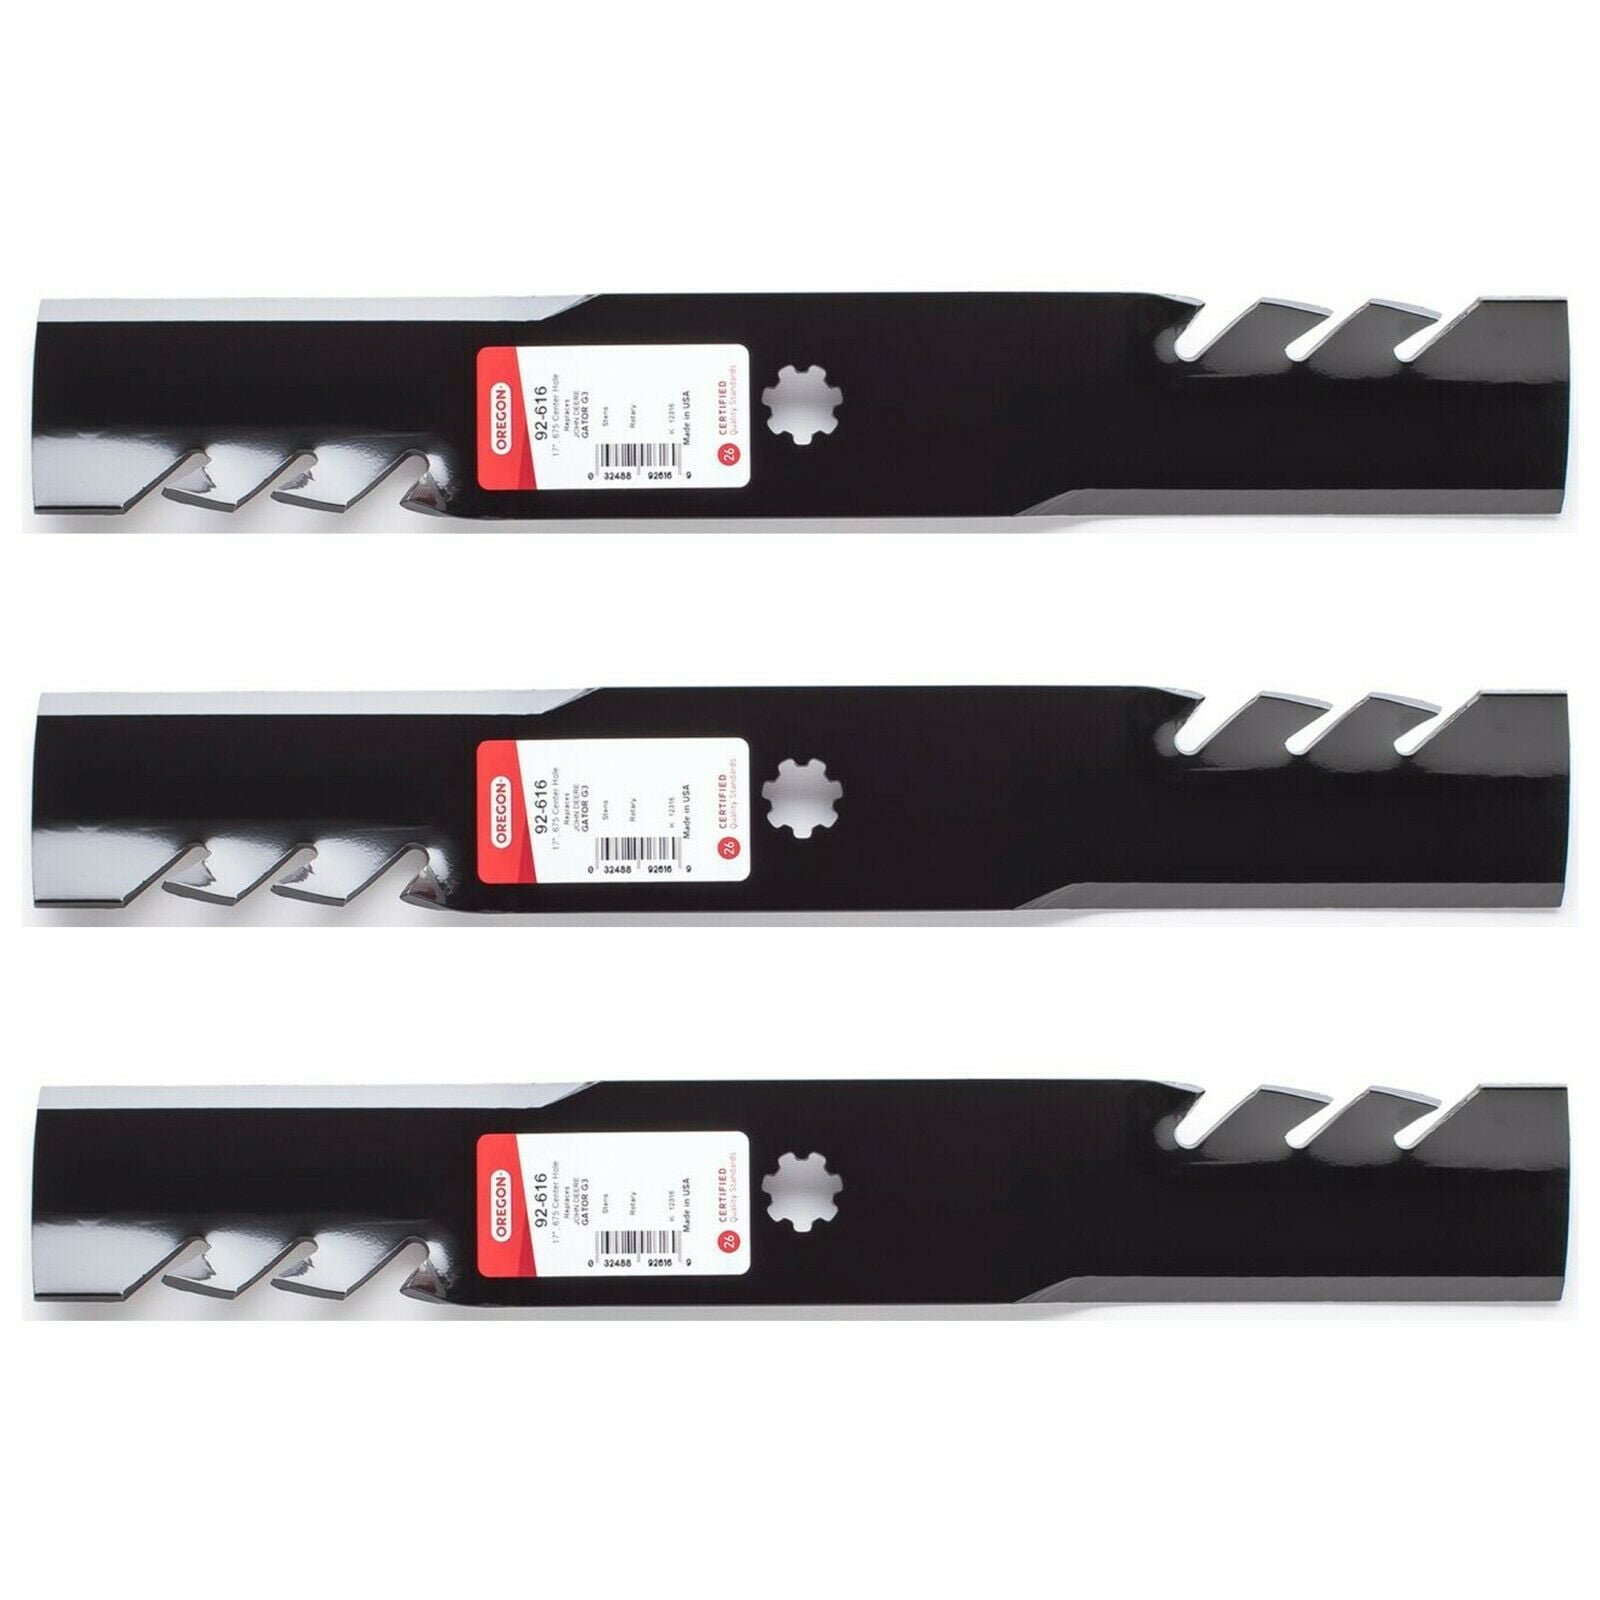 6 Gator Toothed Mulching Mower Blades fit Gravely ZT 00273000 04919100 48" Deck 